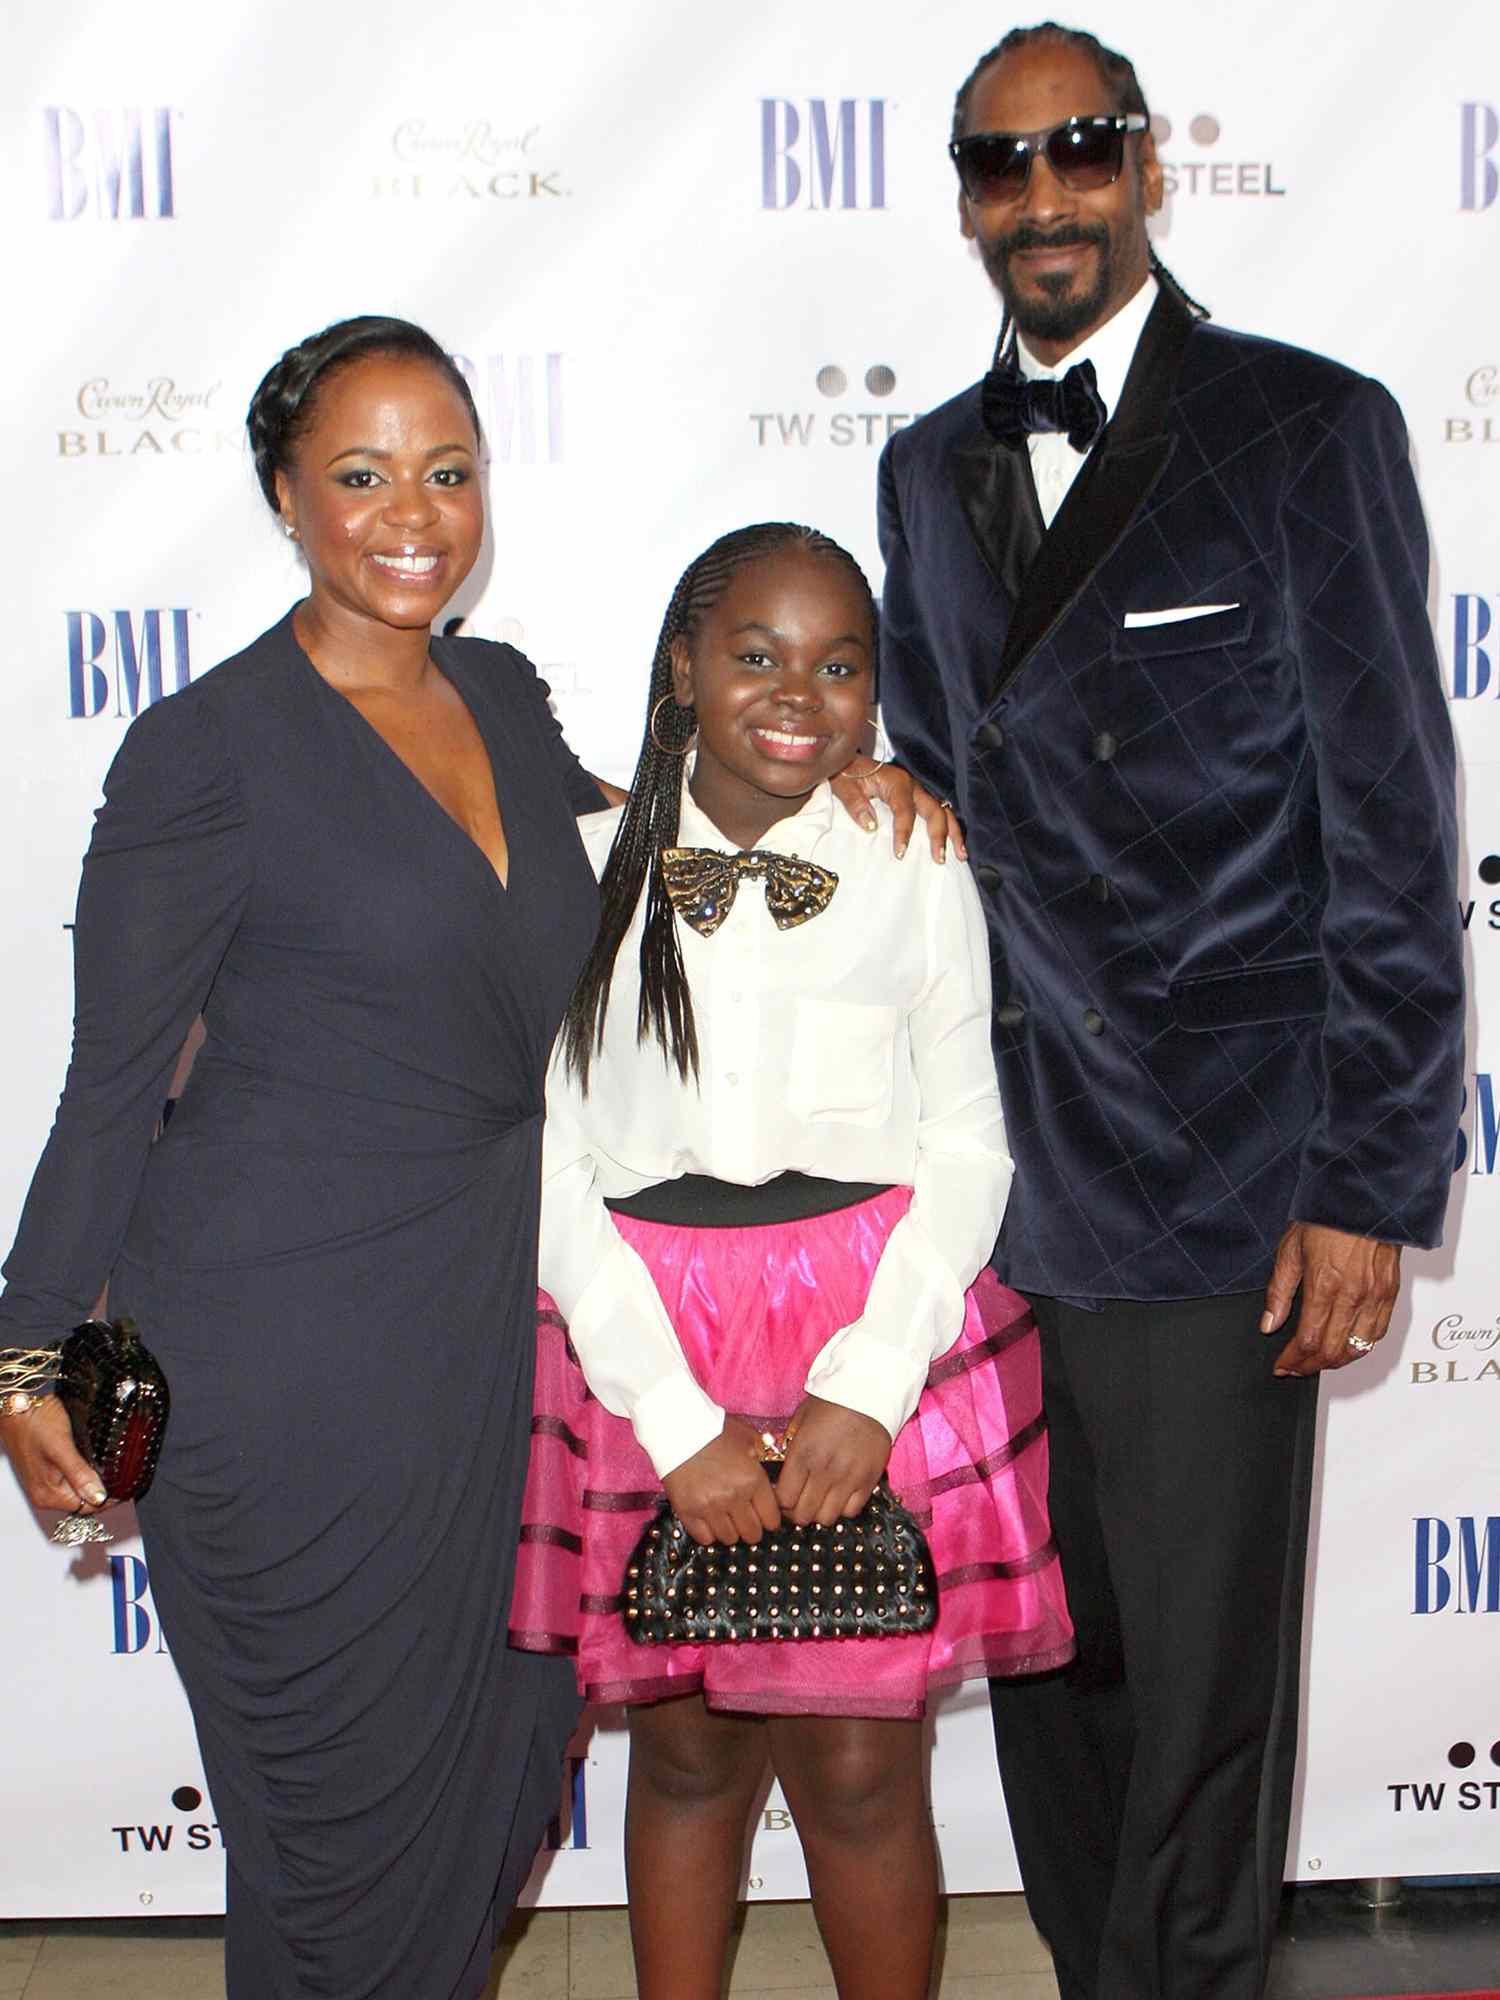 Shante Broadus, Cori Broadus and rapper Snoop Dogg arrive at the 11th Annual BMI Urban Awards on August 26, 2011 in Hollywood, California.